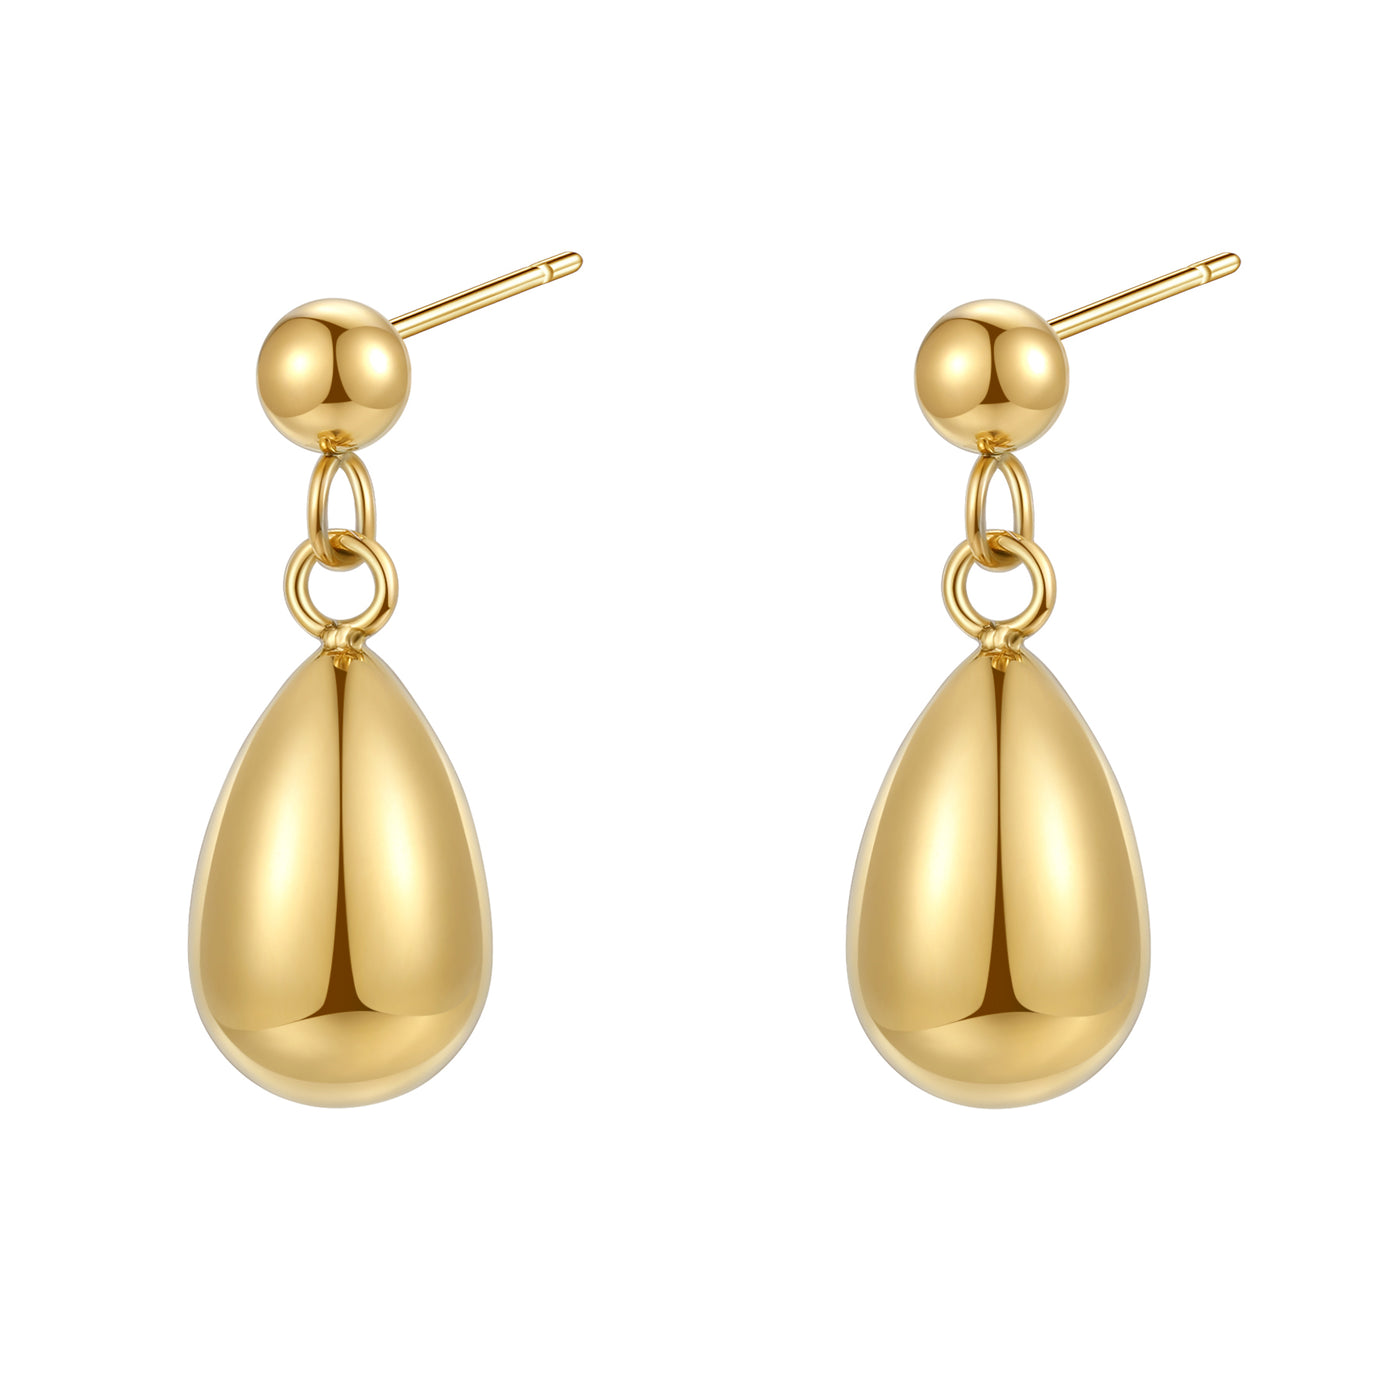 Ball and Drop Earrings Stainless Steel